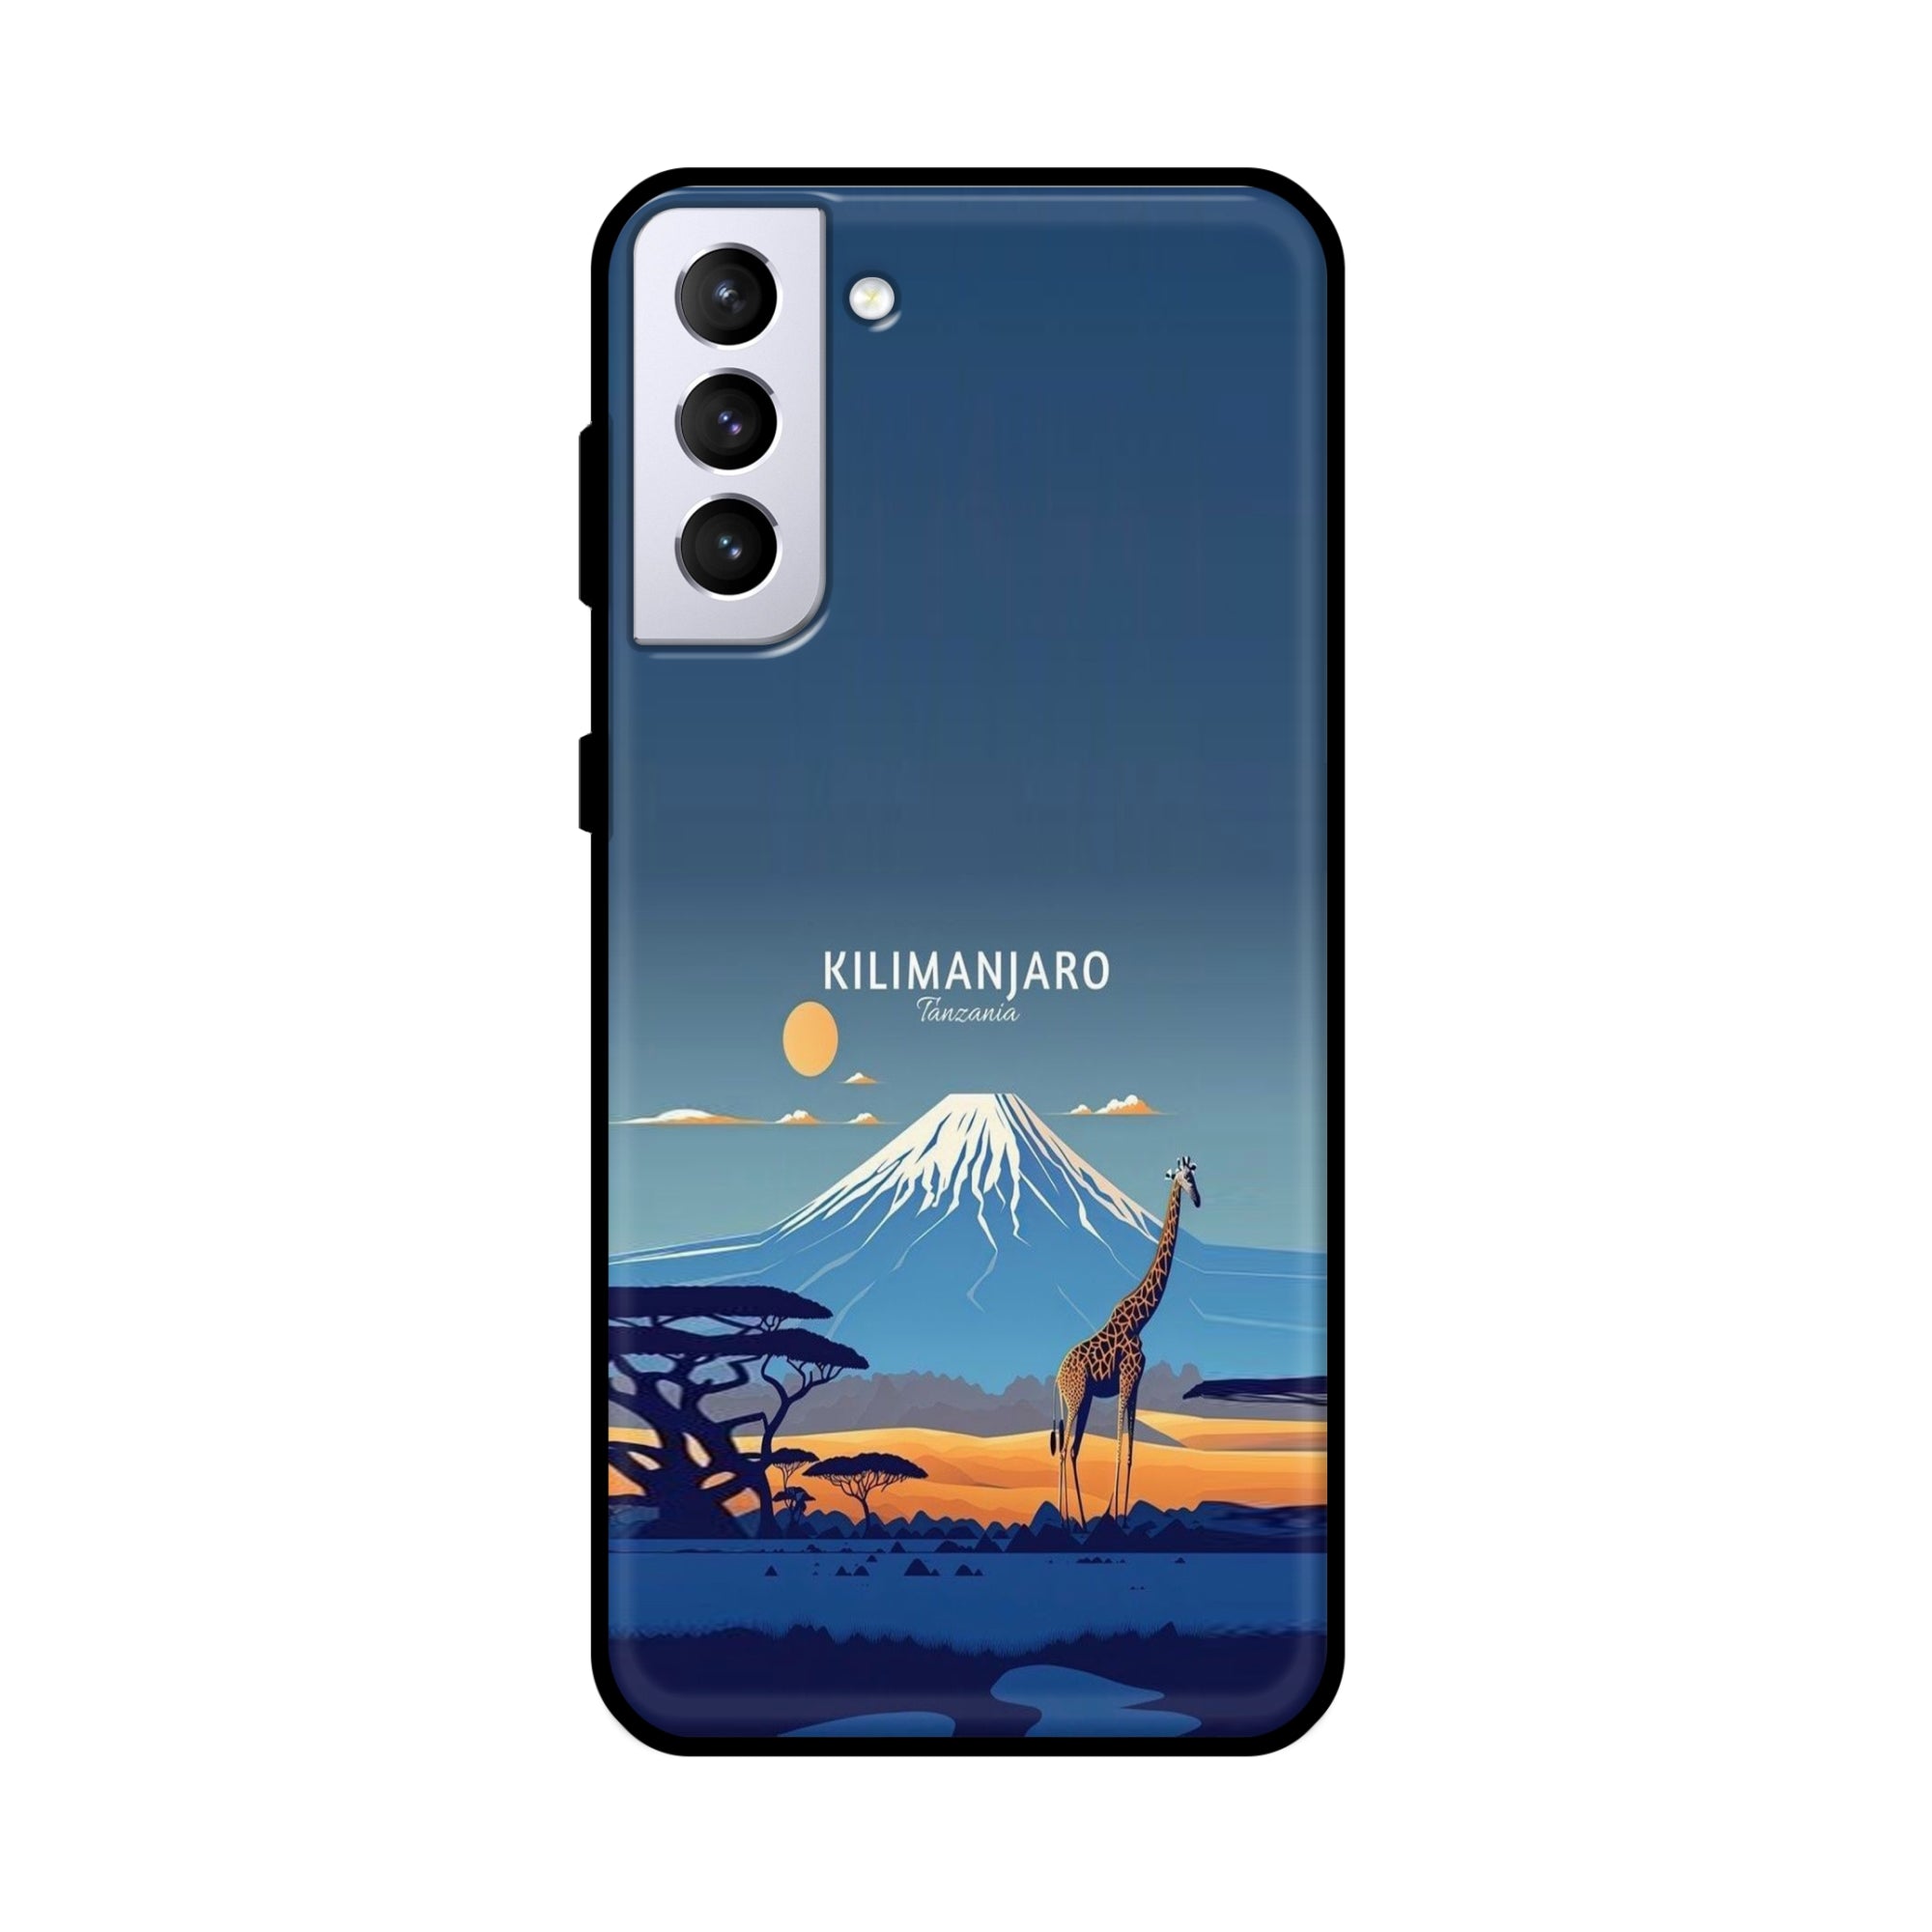 Buy Kilimanjaro Metal-Silicon Back Mobile Phone Case/Cover For Samsung Galaxy S21 Online